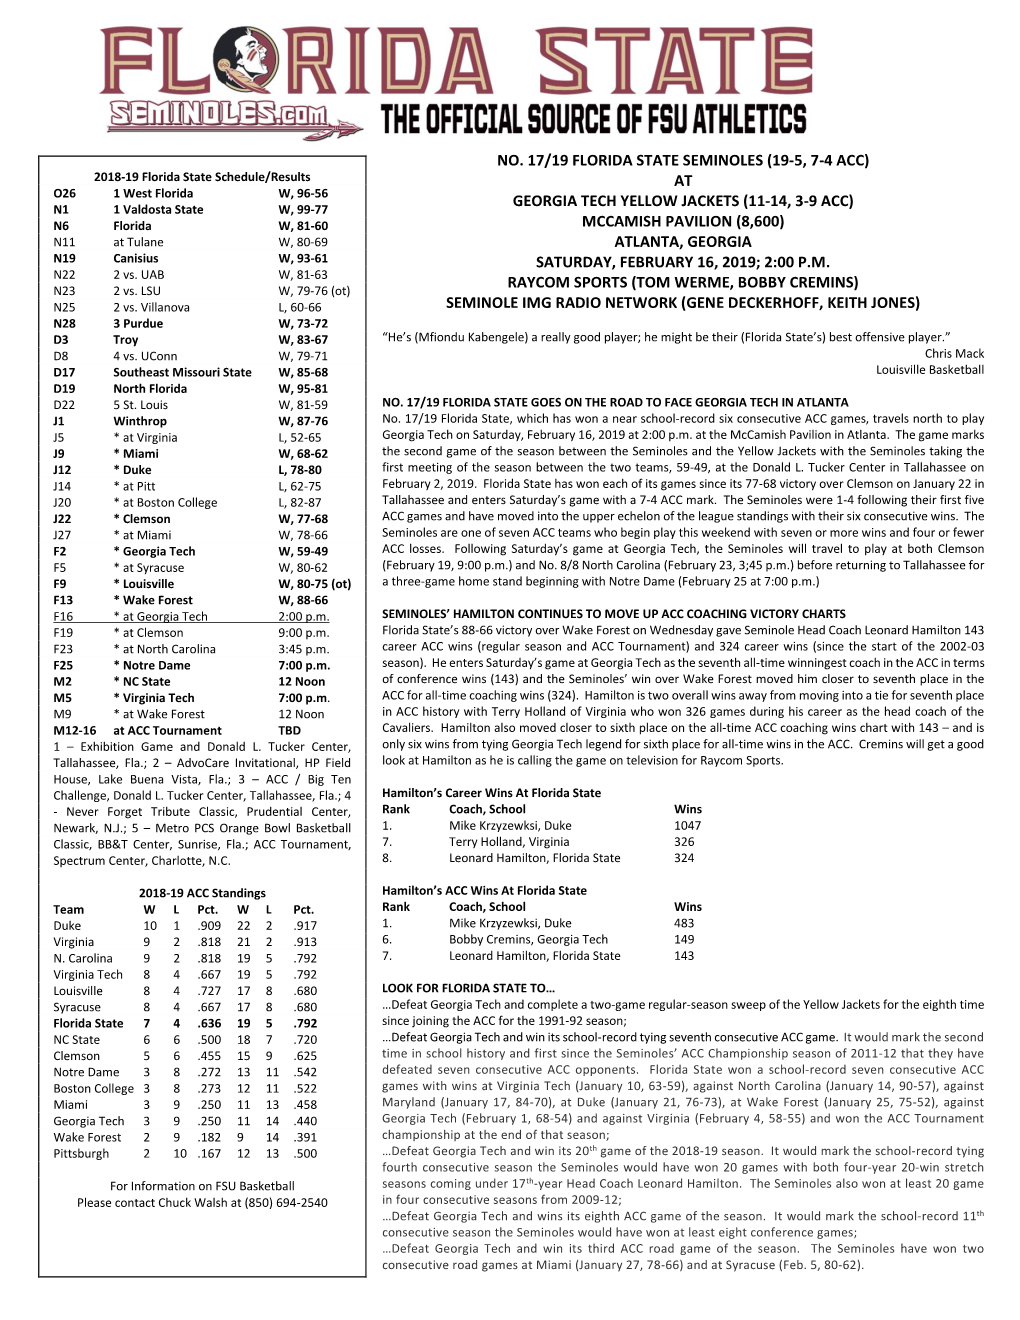 2008-09 Florida State Men's Basketball Schedule Notes